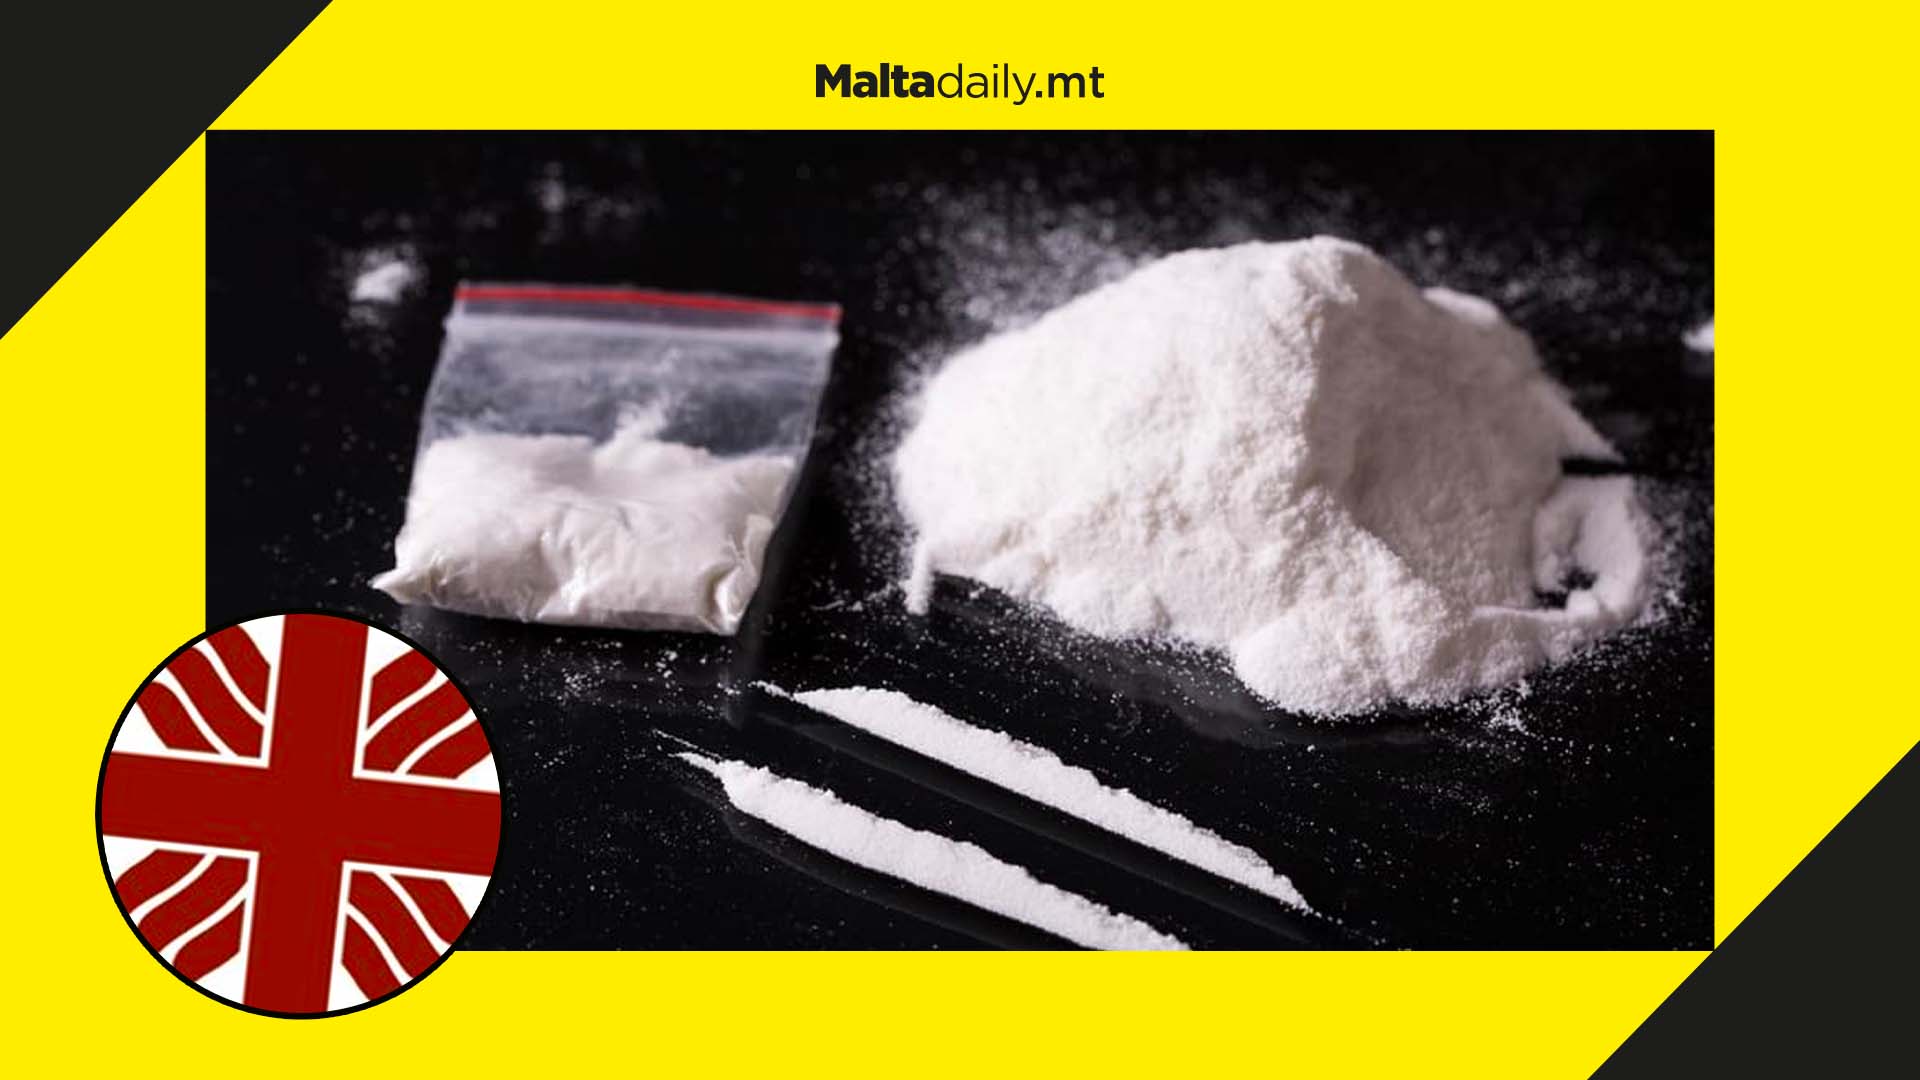 Record number of people seek help from Caritas due cocaine use